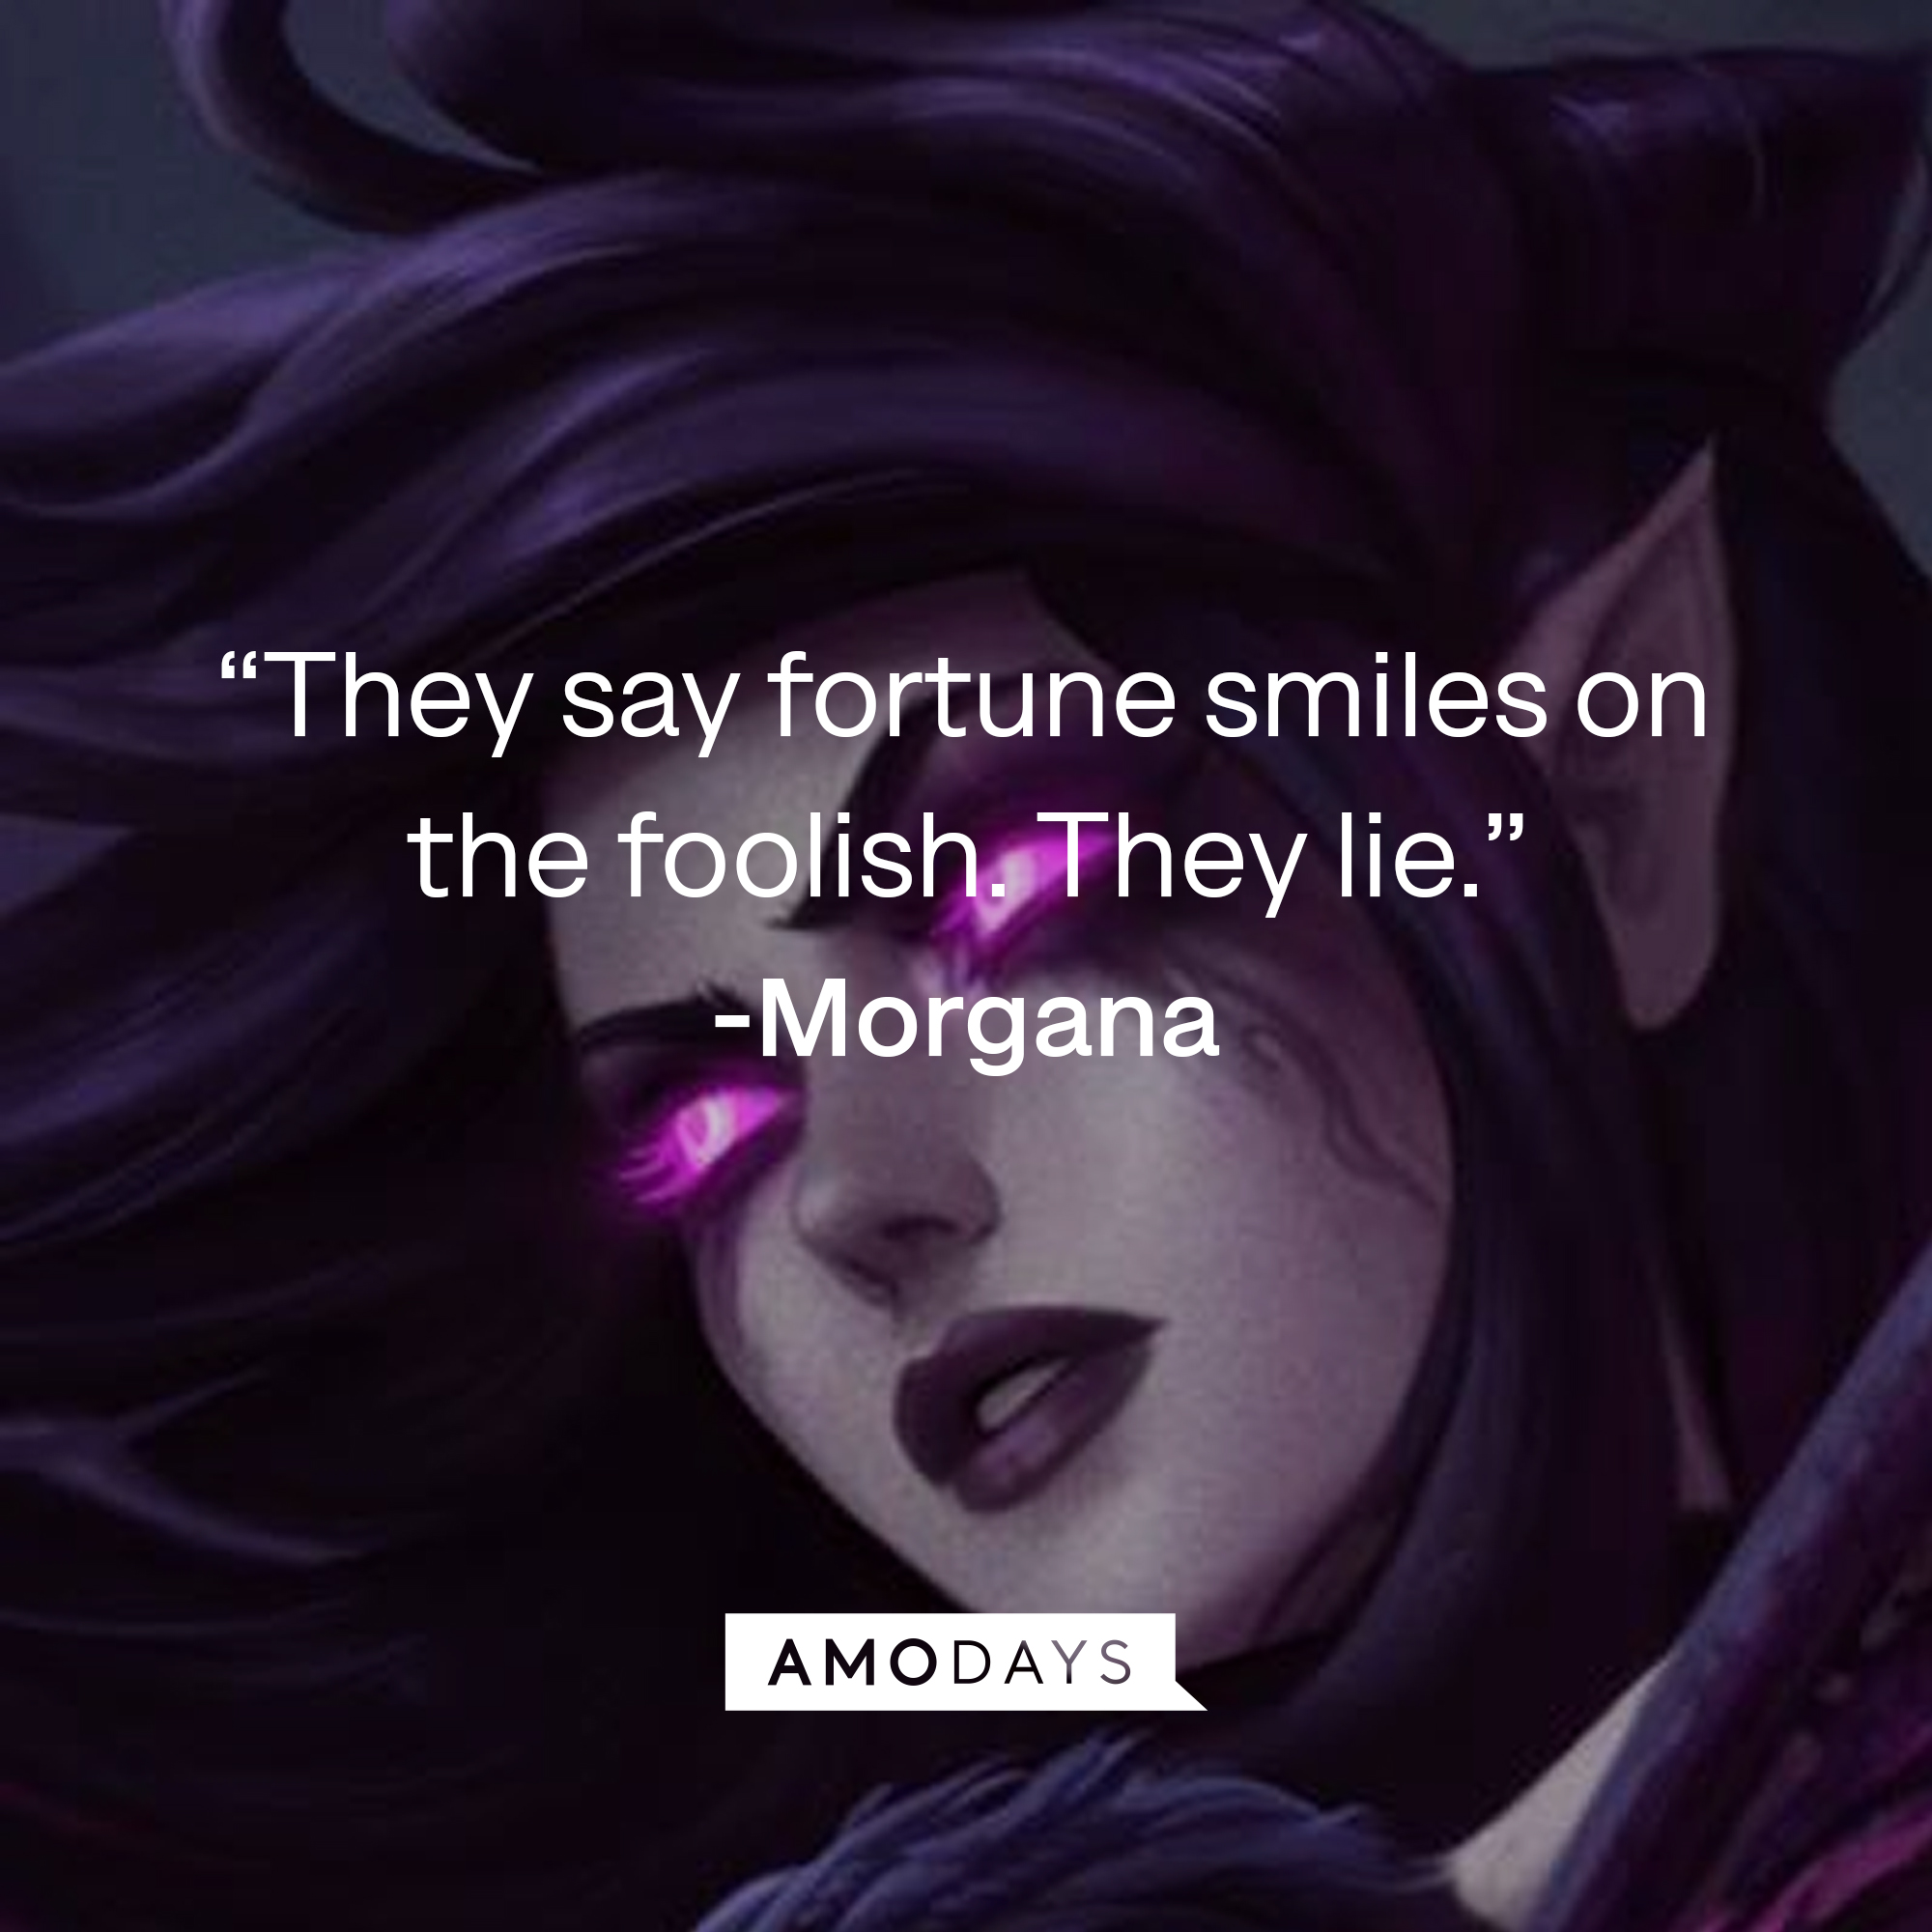 An image of Morgana, with her quote: "They say fortune smiles on the foolish. They lie." | Source: Facebook.com/leagueoflegends